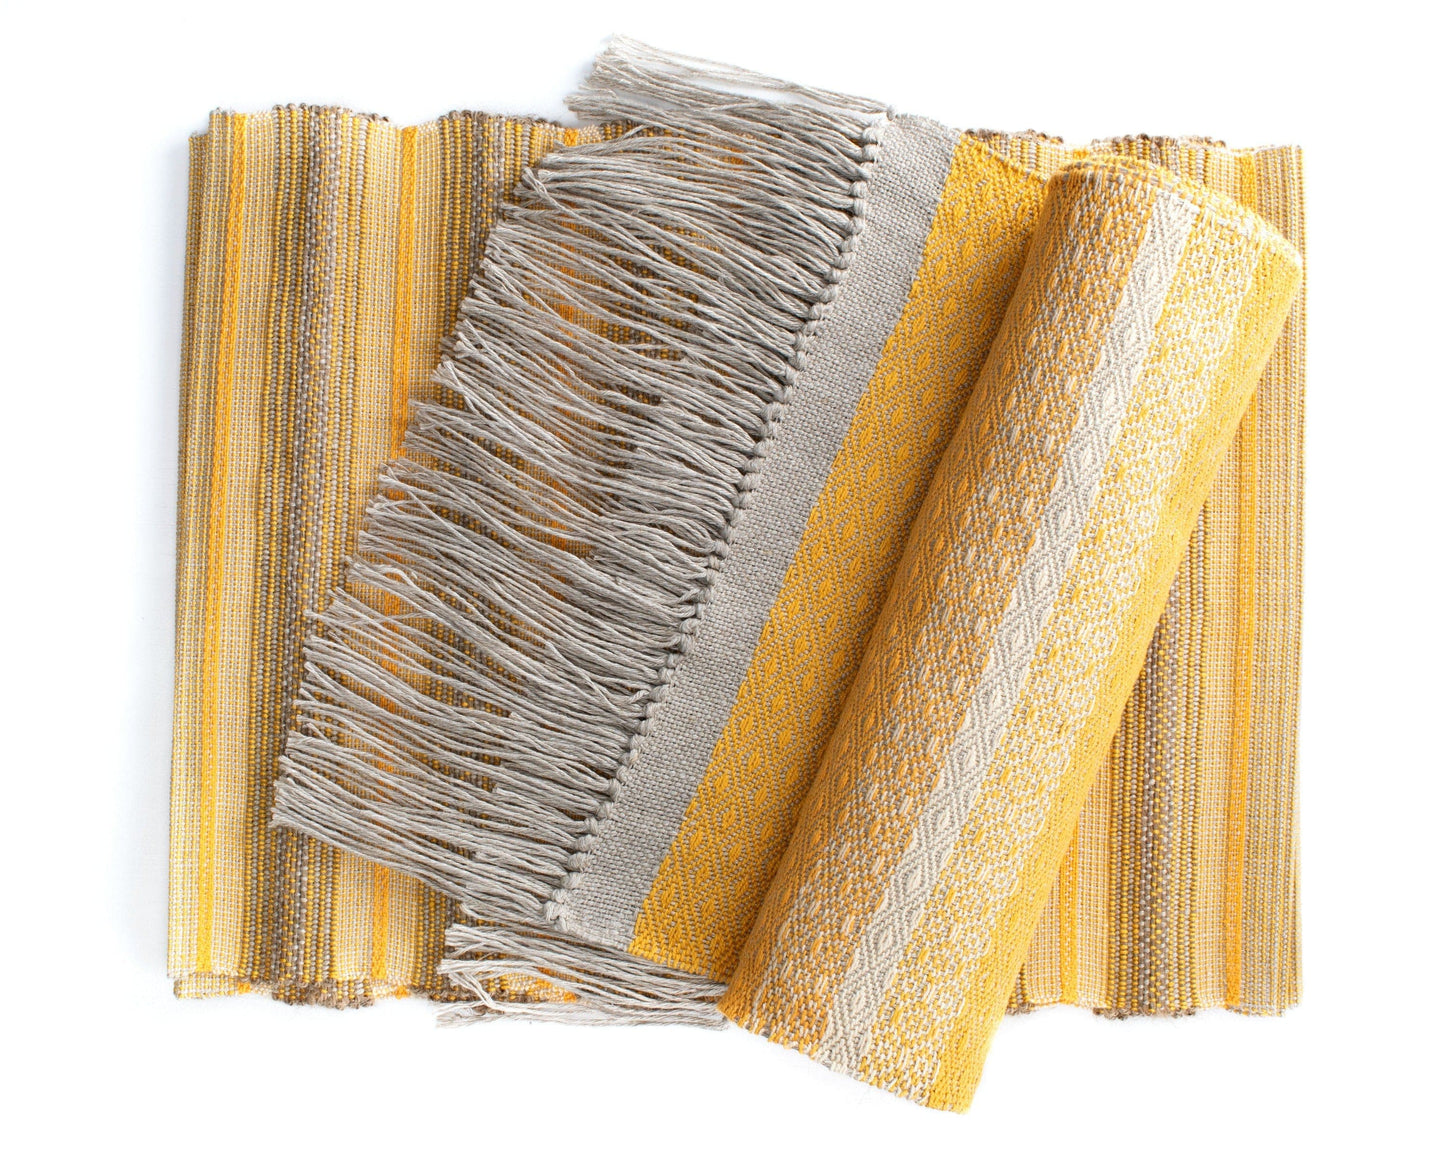 The Carpentry Shop Co. Copy of Handmade Woven Placemats & Table Runners by Local Artisan in Signature Yellow